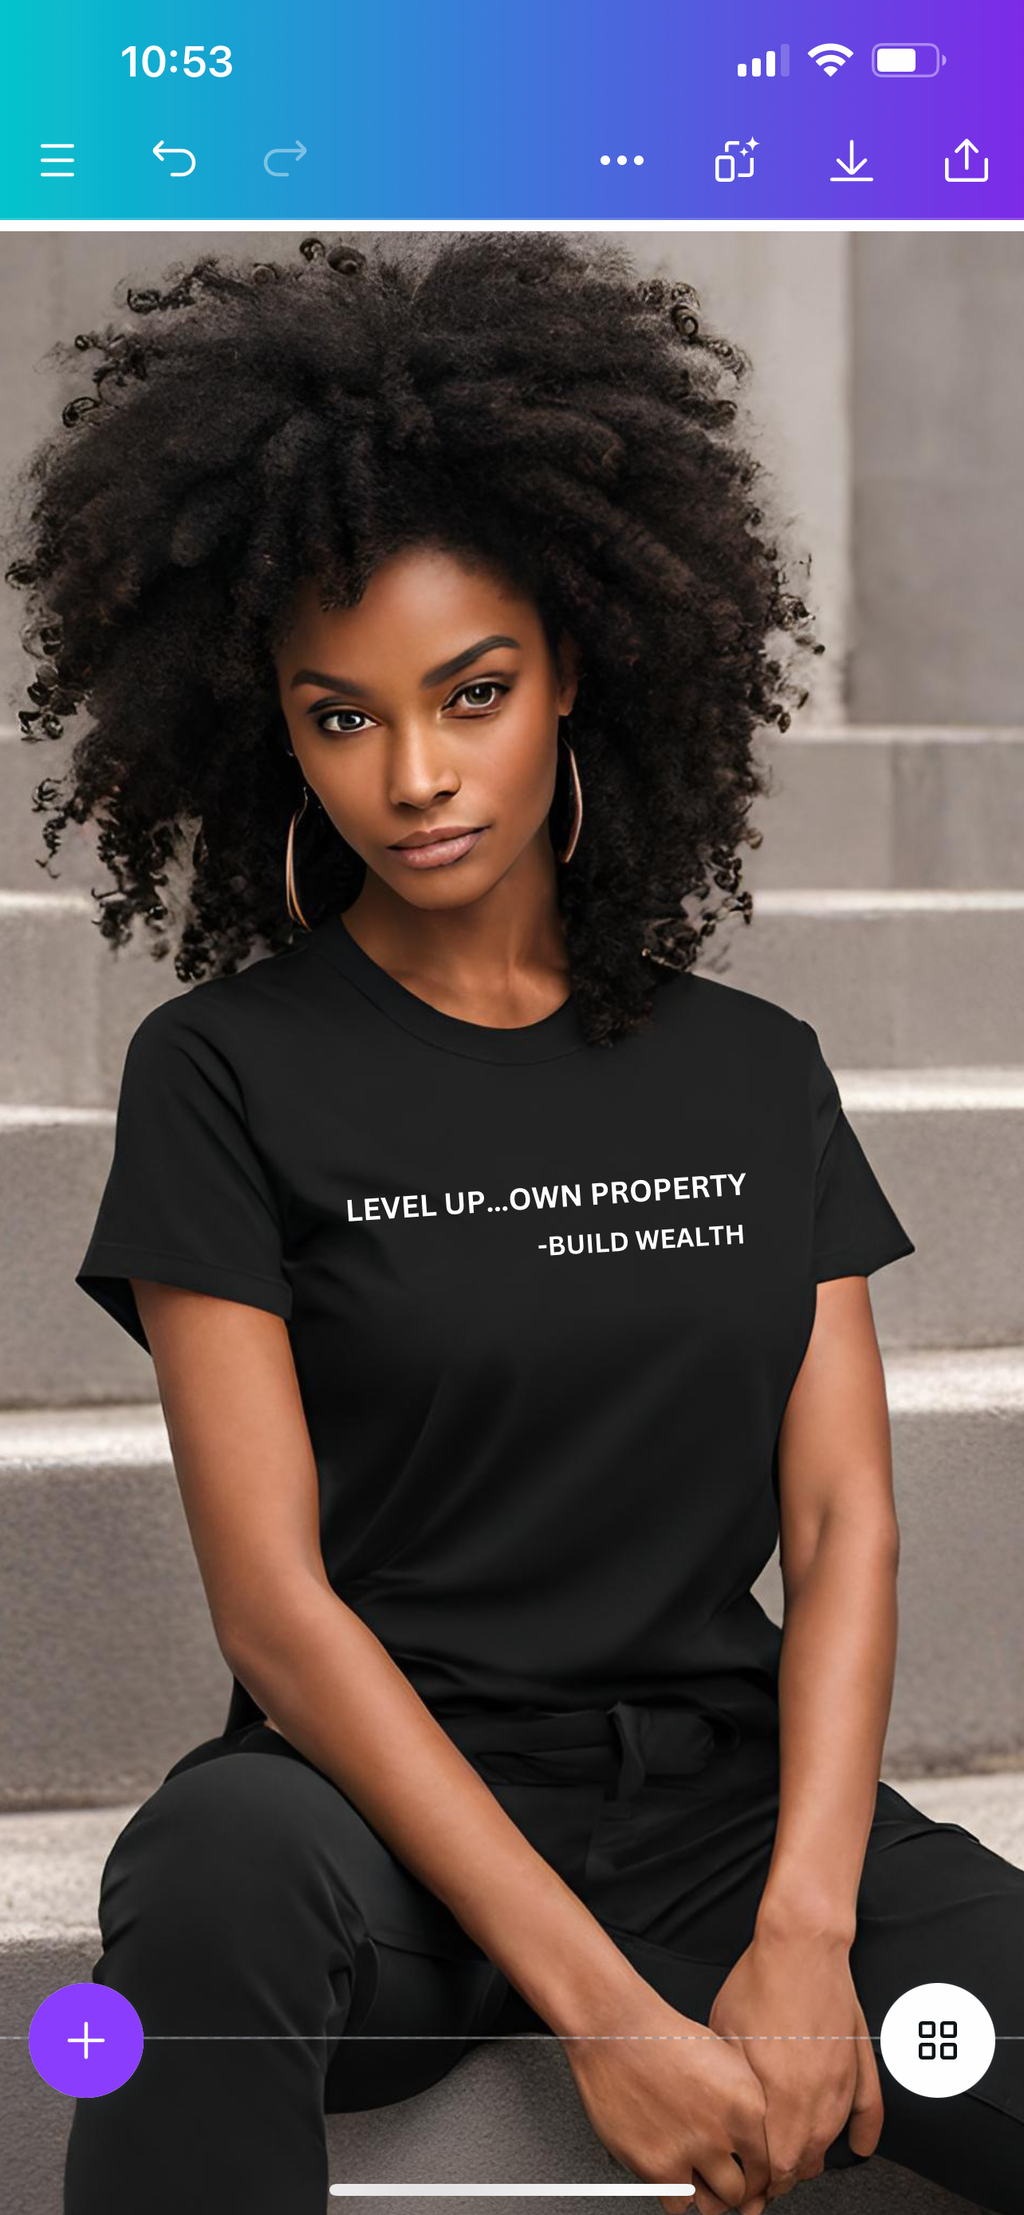 Level Up…Own Property